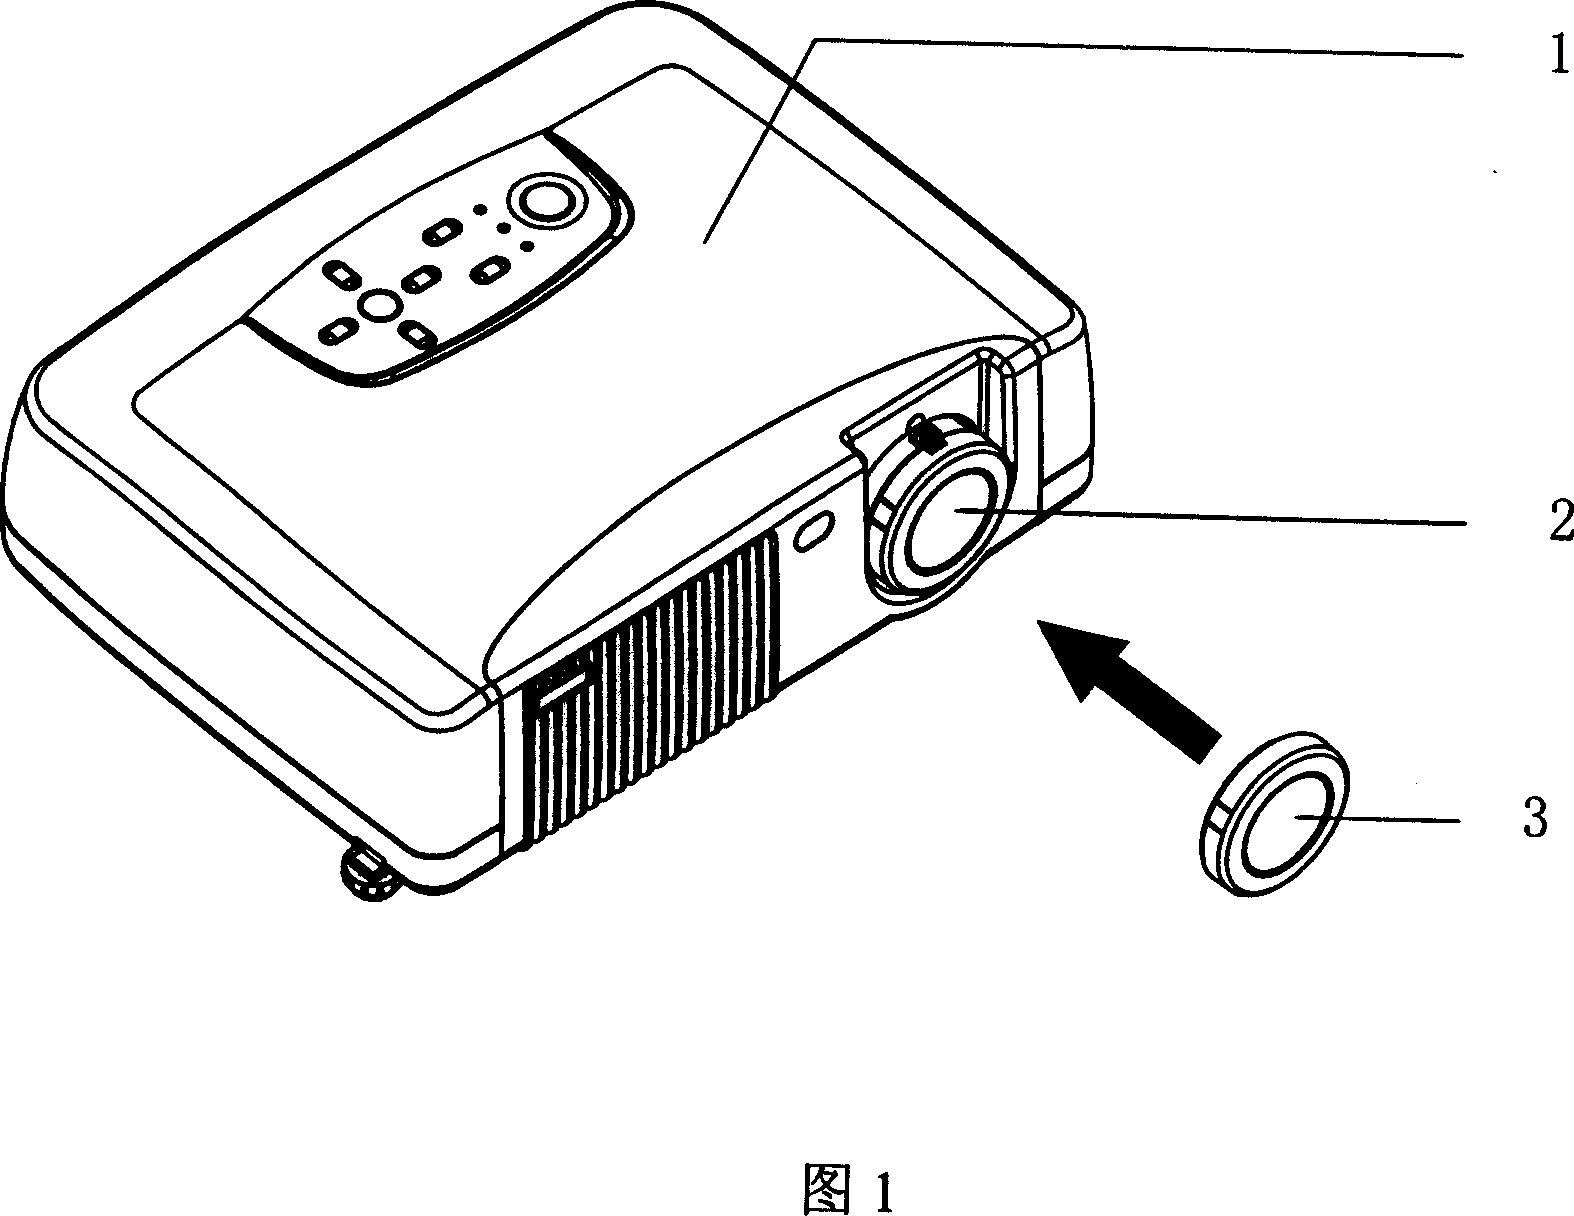 Projector with cleanable protective cover for camera lens